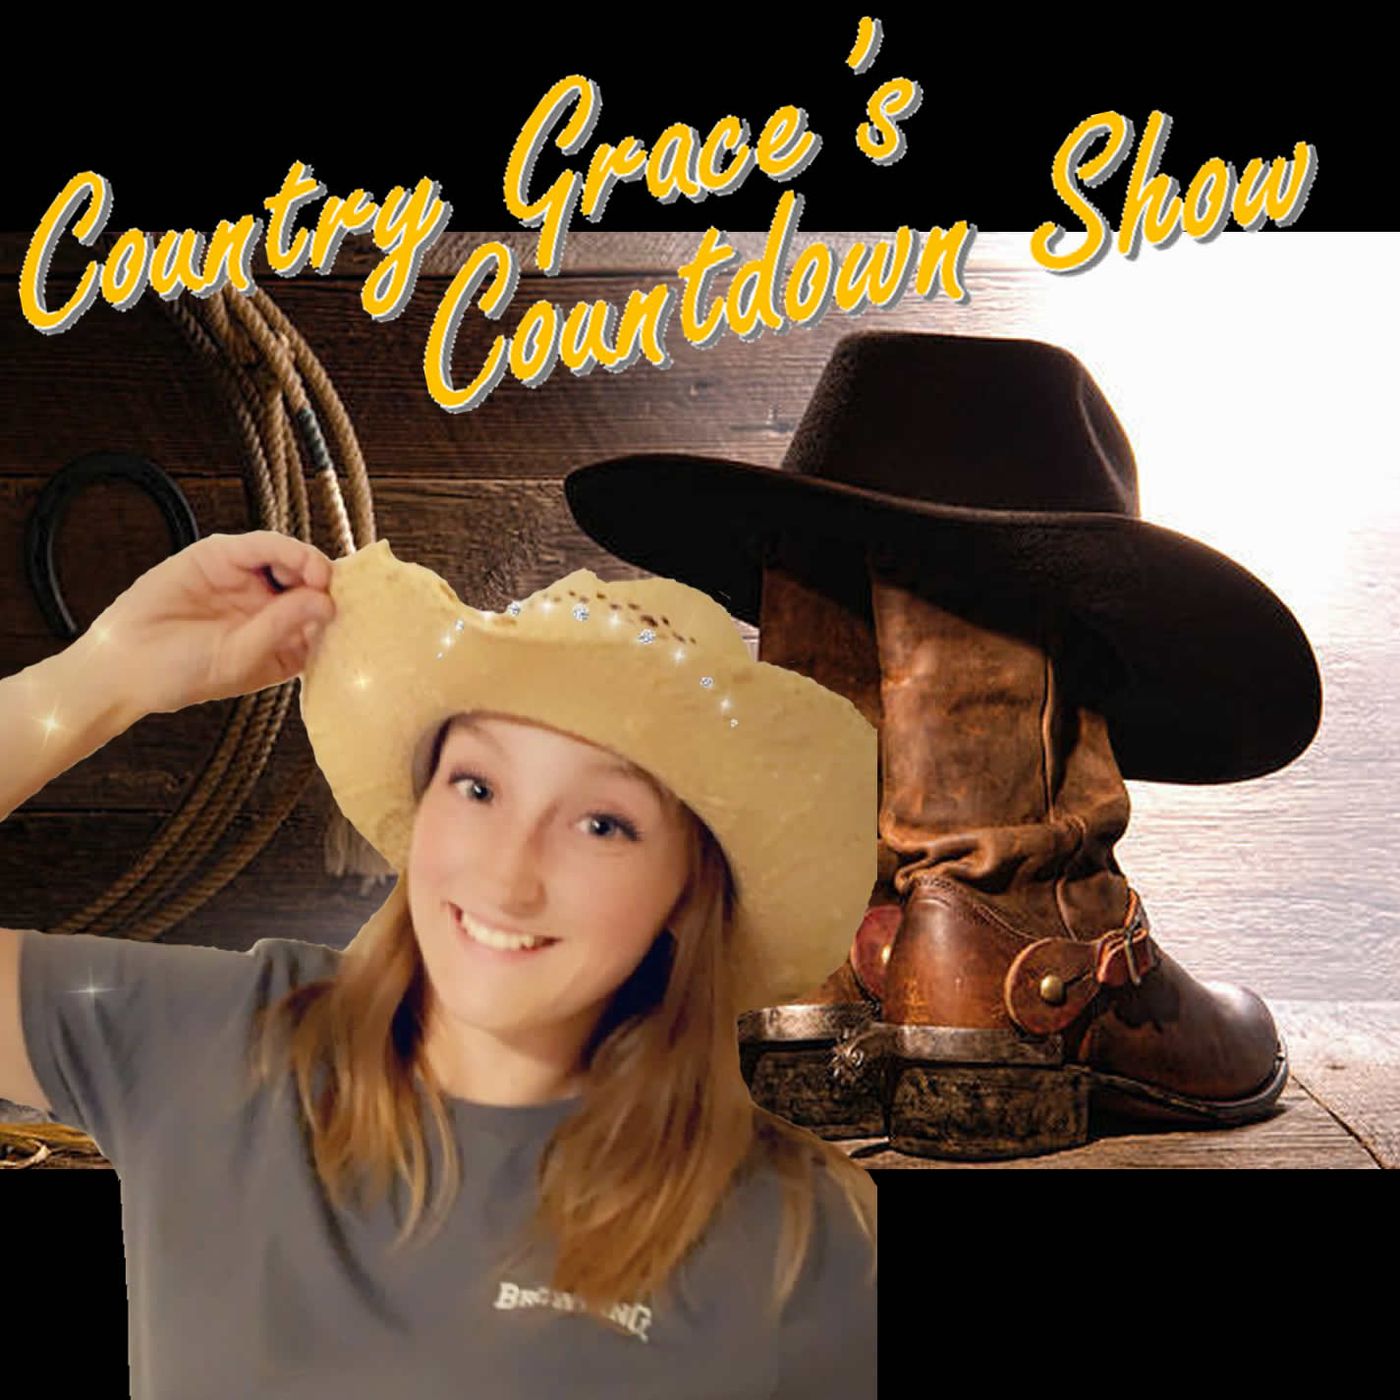 Country Grace's Countdown Show